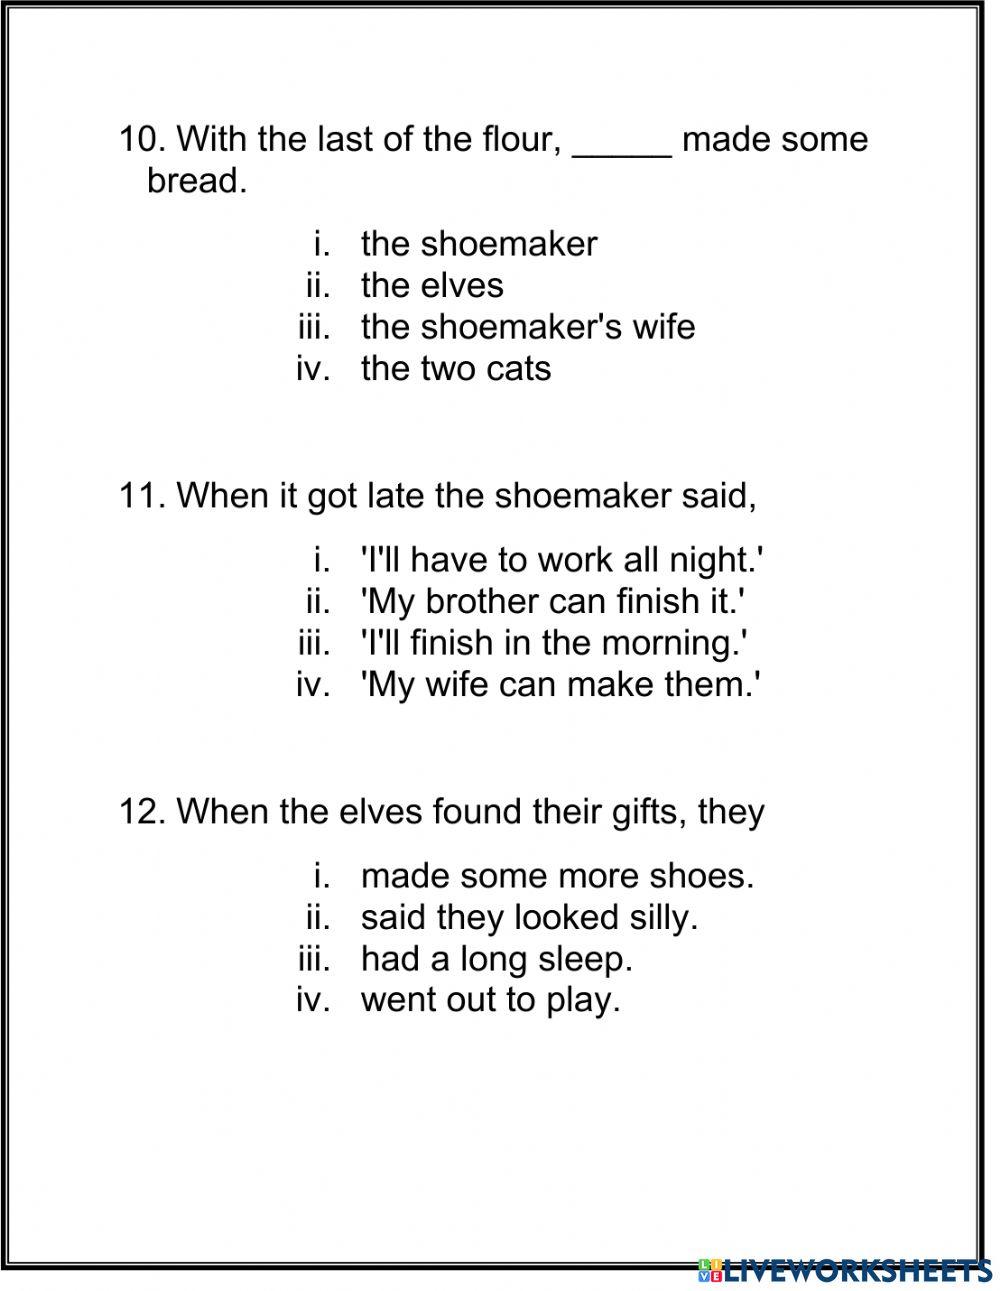 Elves and the shoemaker-comp